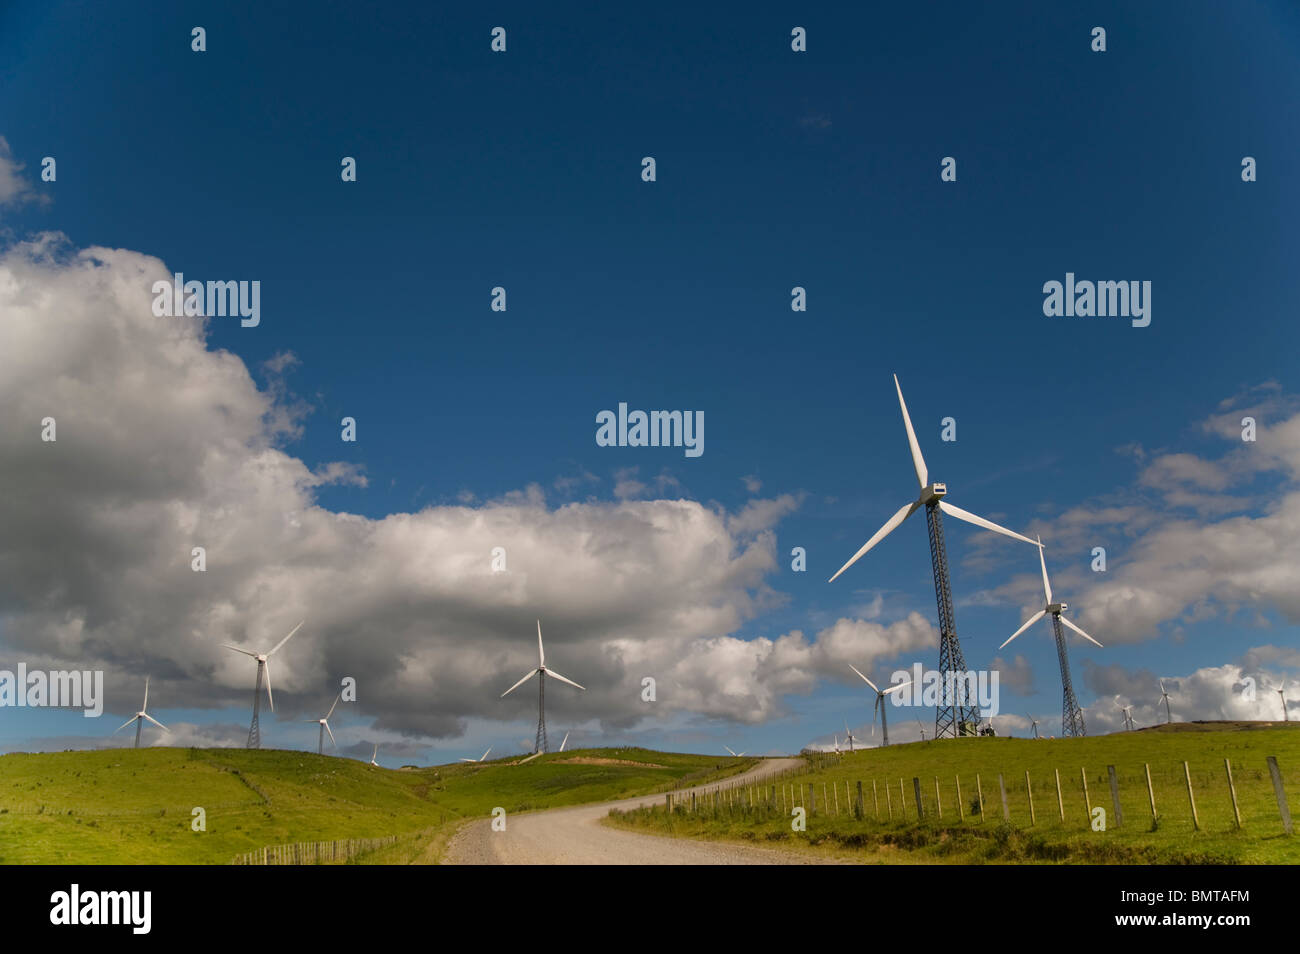 Palmerston North, New Zealand; Wind Turbines In A Field With A Road Going Through Stock Photo